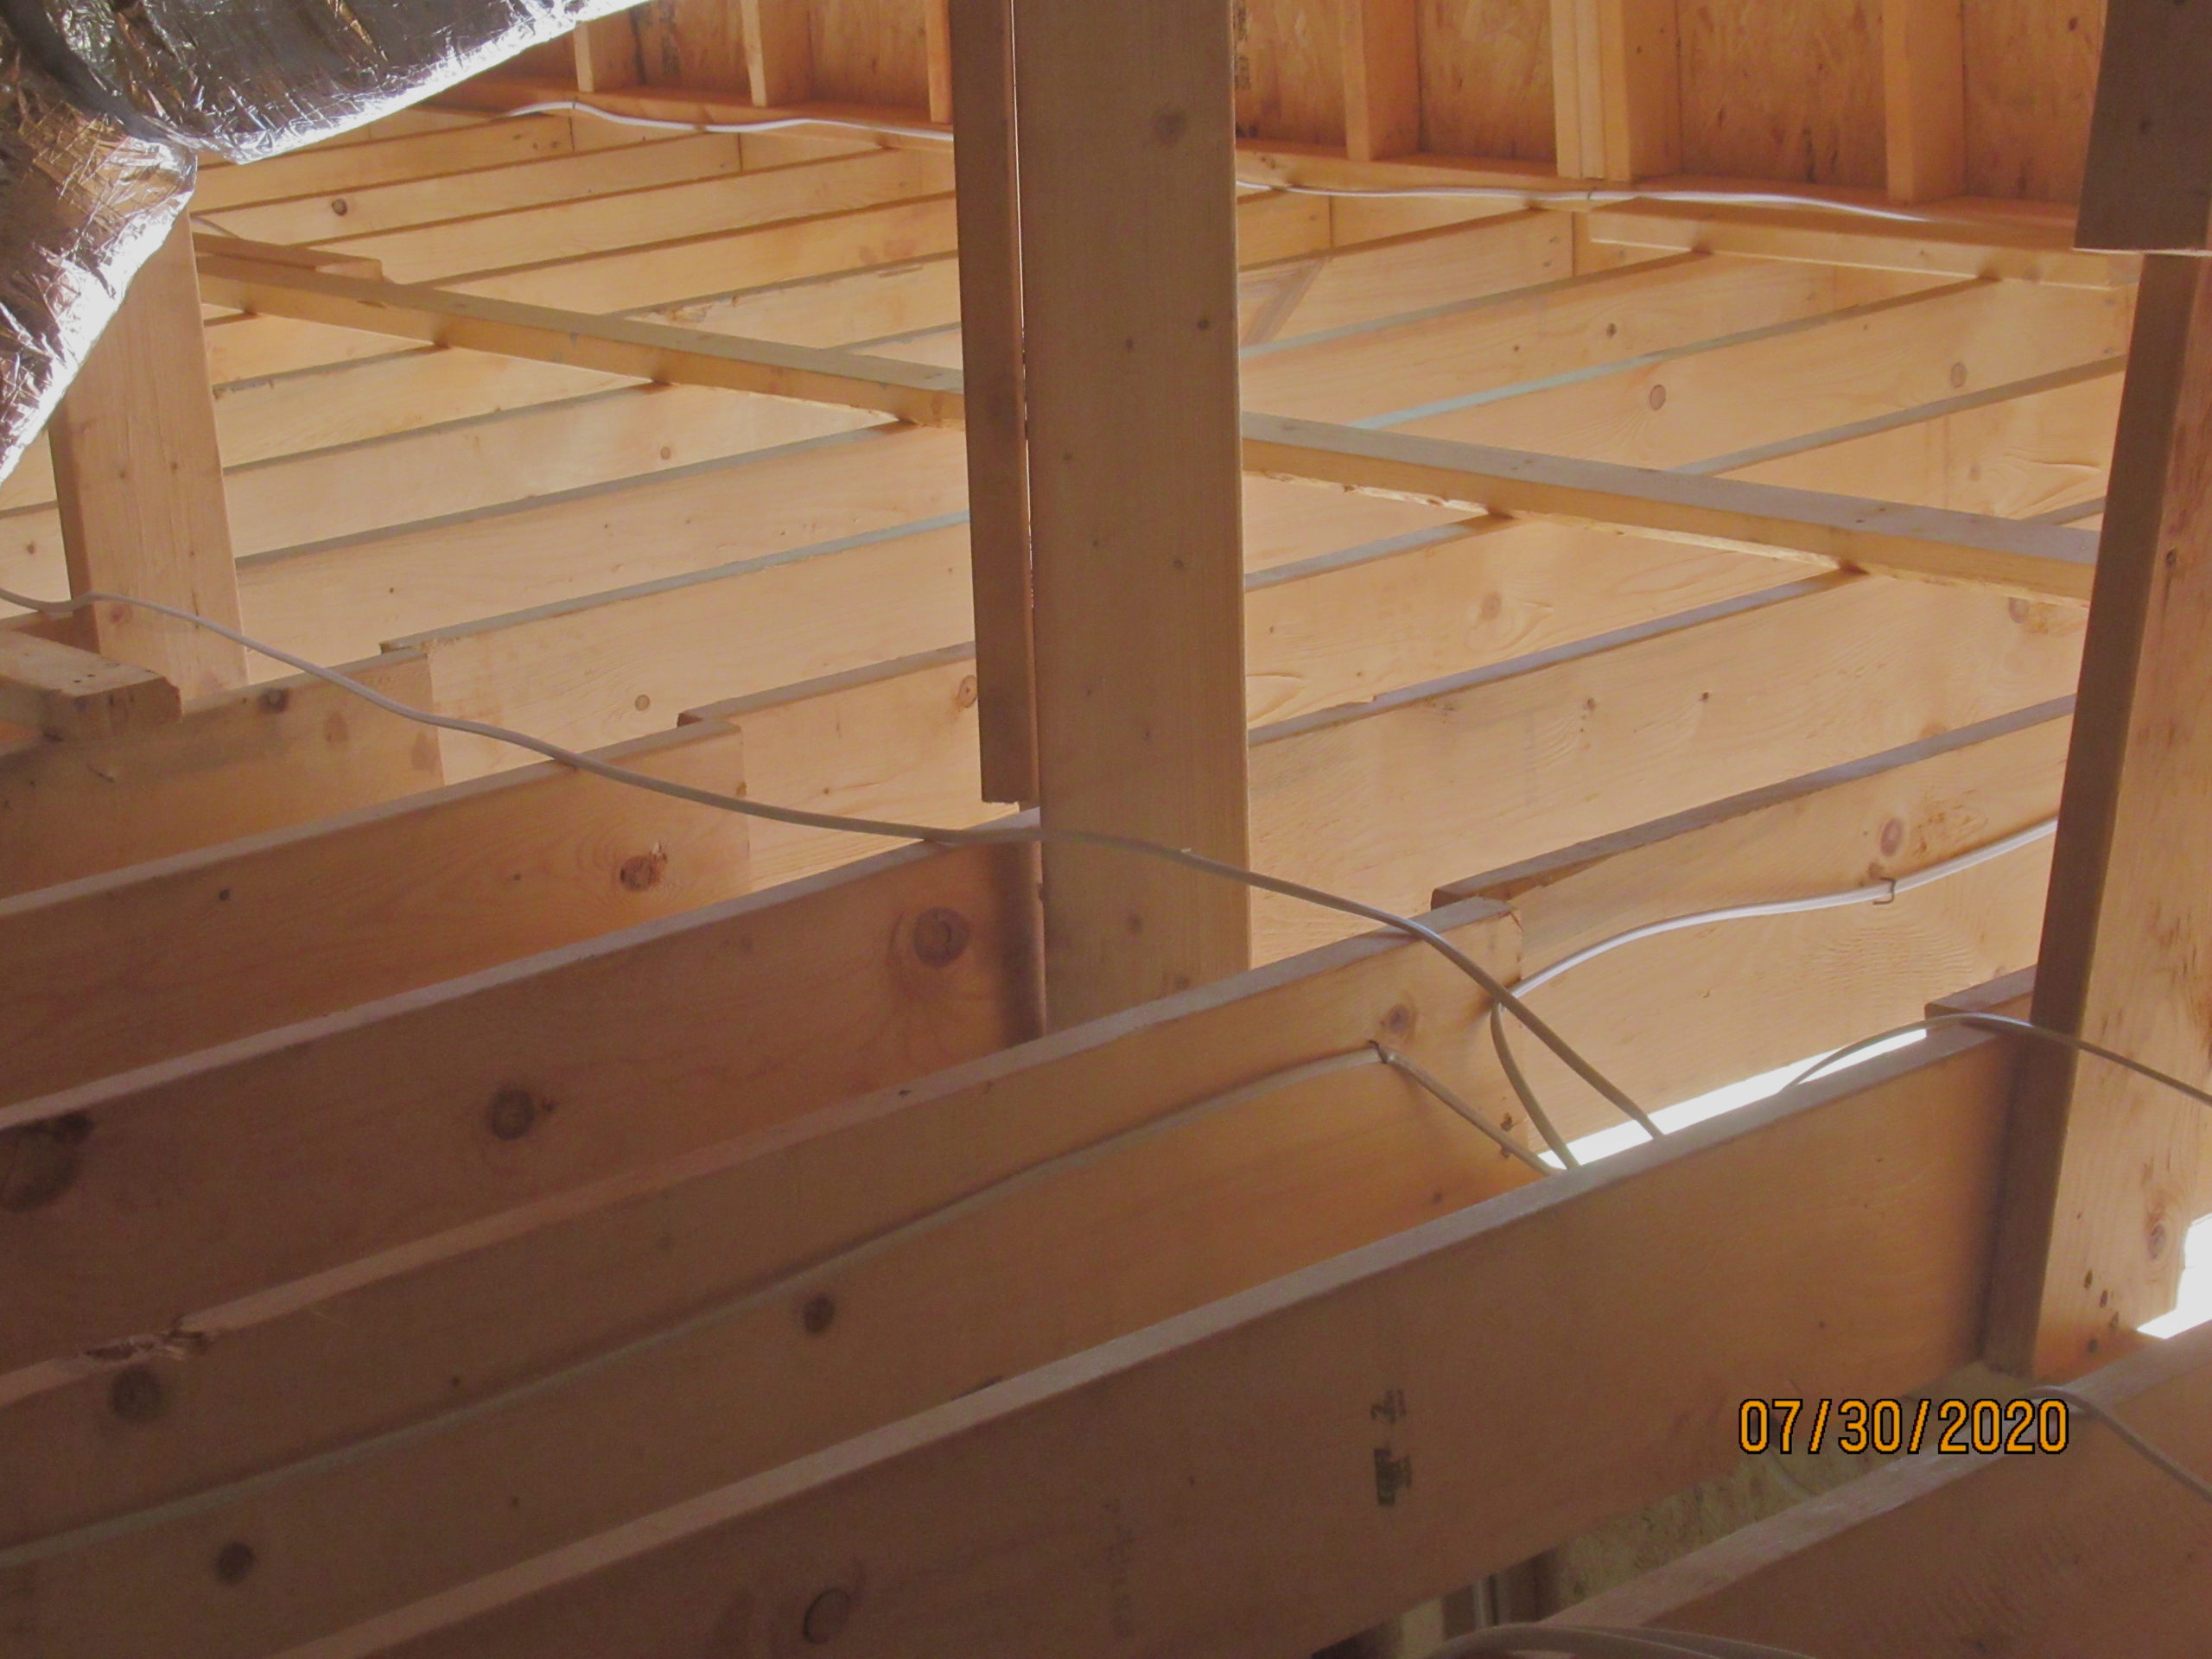 Ceiling joist lapping